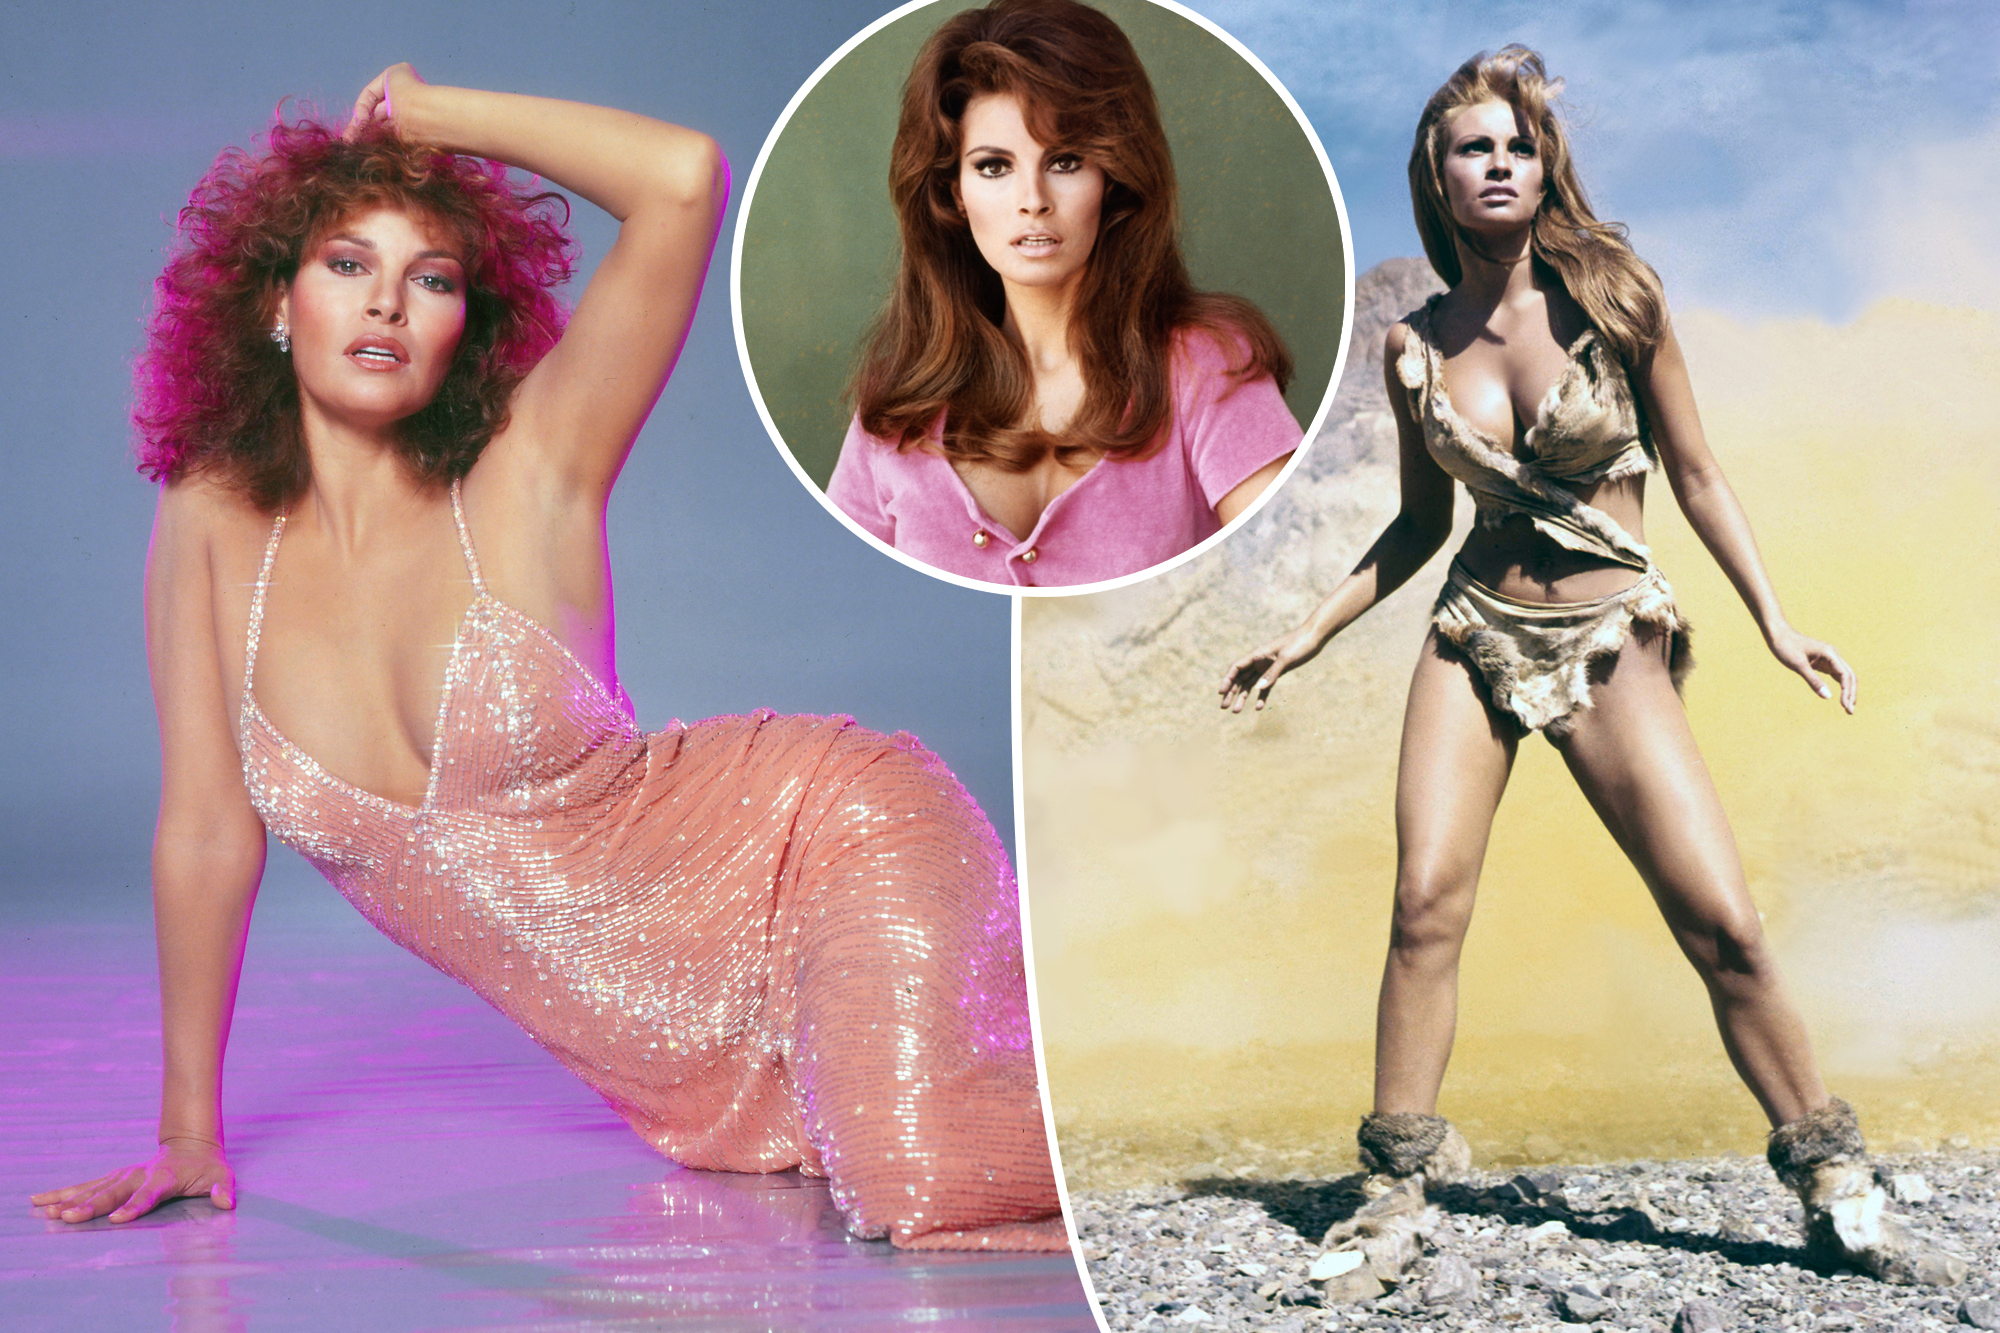 daniel silveira recommends raquel welch young nude pic